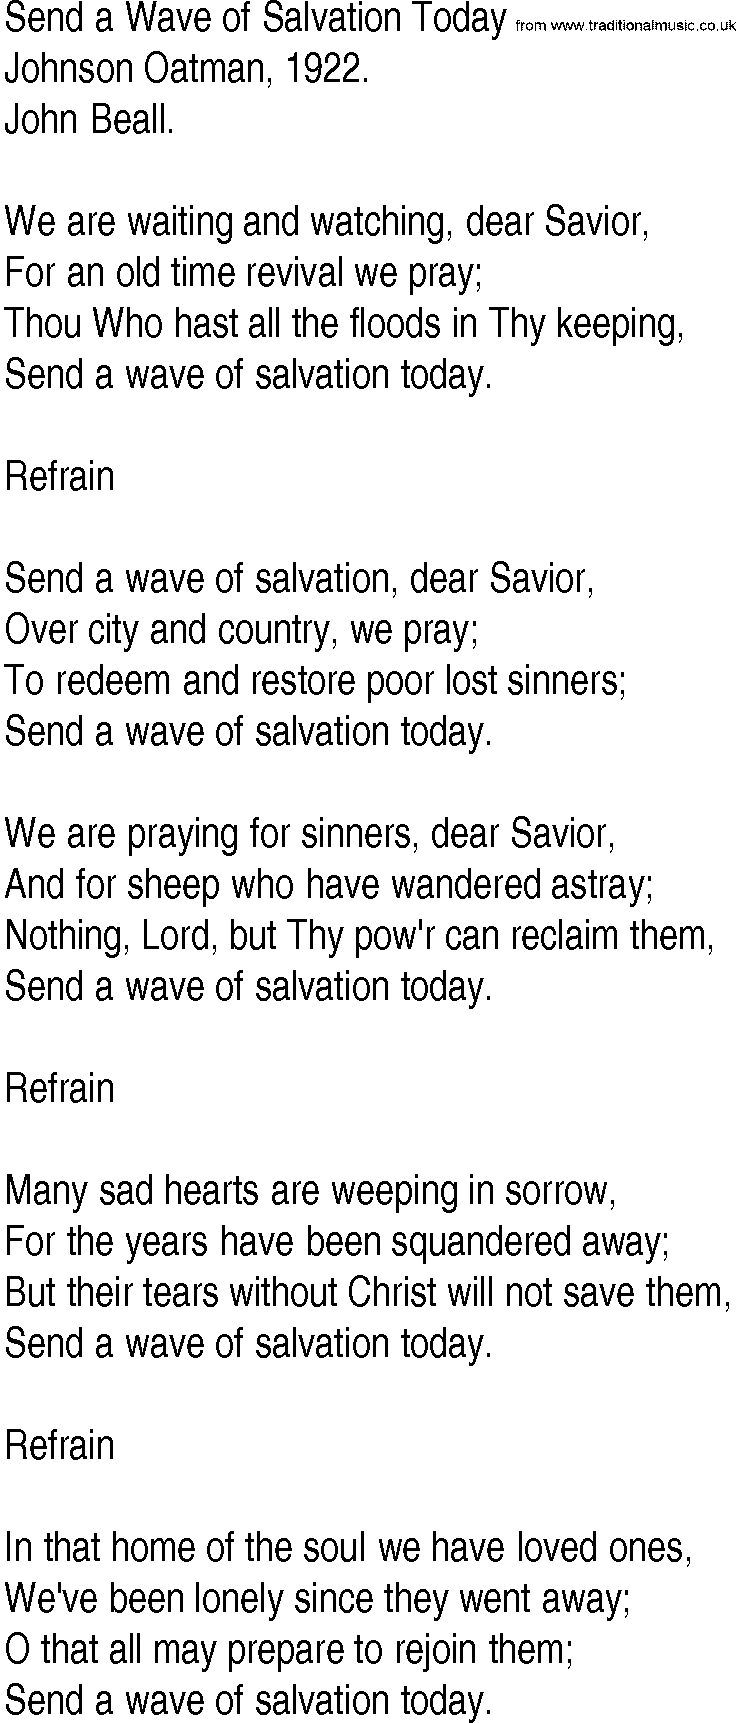 Hymn and Gospel Song: Send a Wave of Salvation Today by Johnson Oatman lyrics